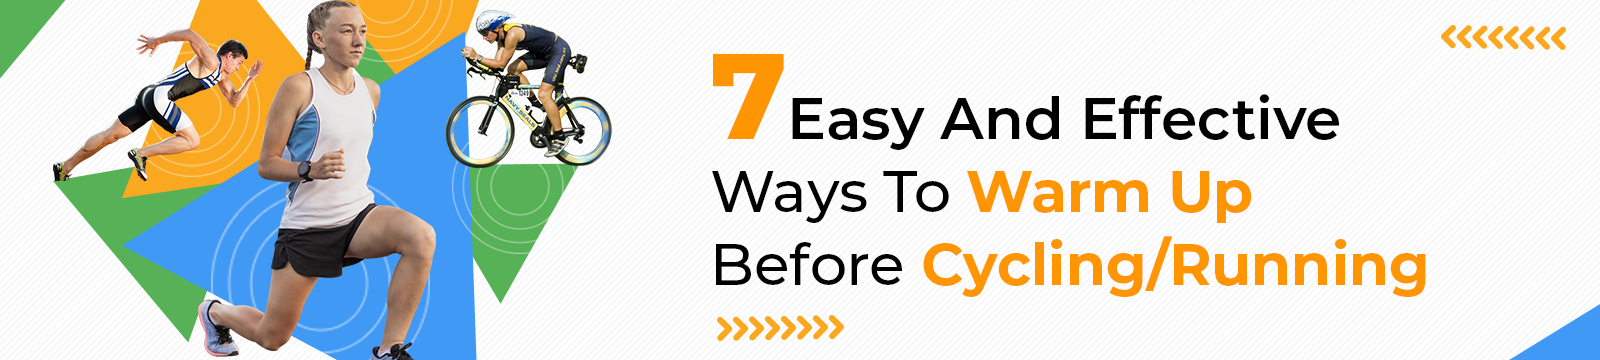 7 Easy And Effective Ways To Warm Up Before Cycling/Running